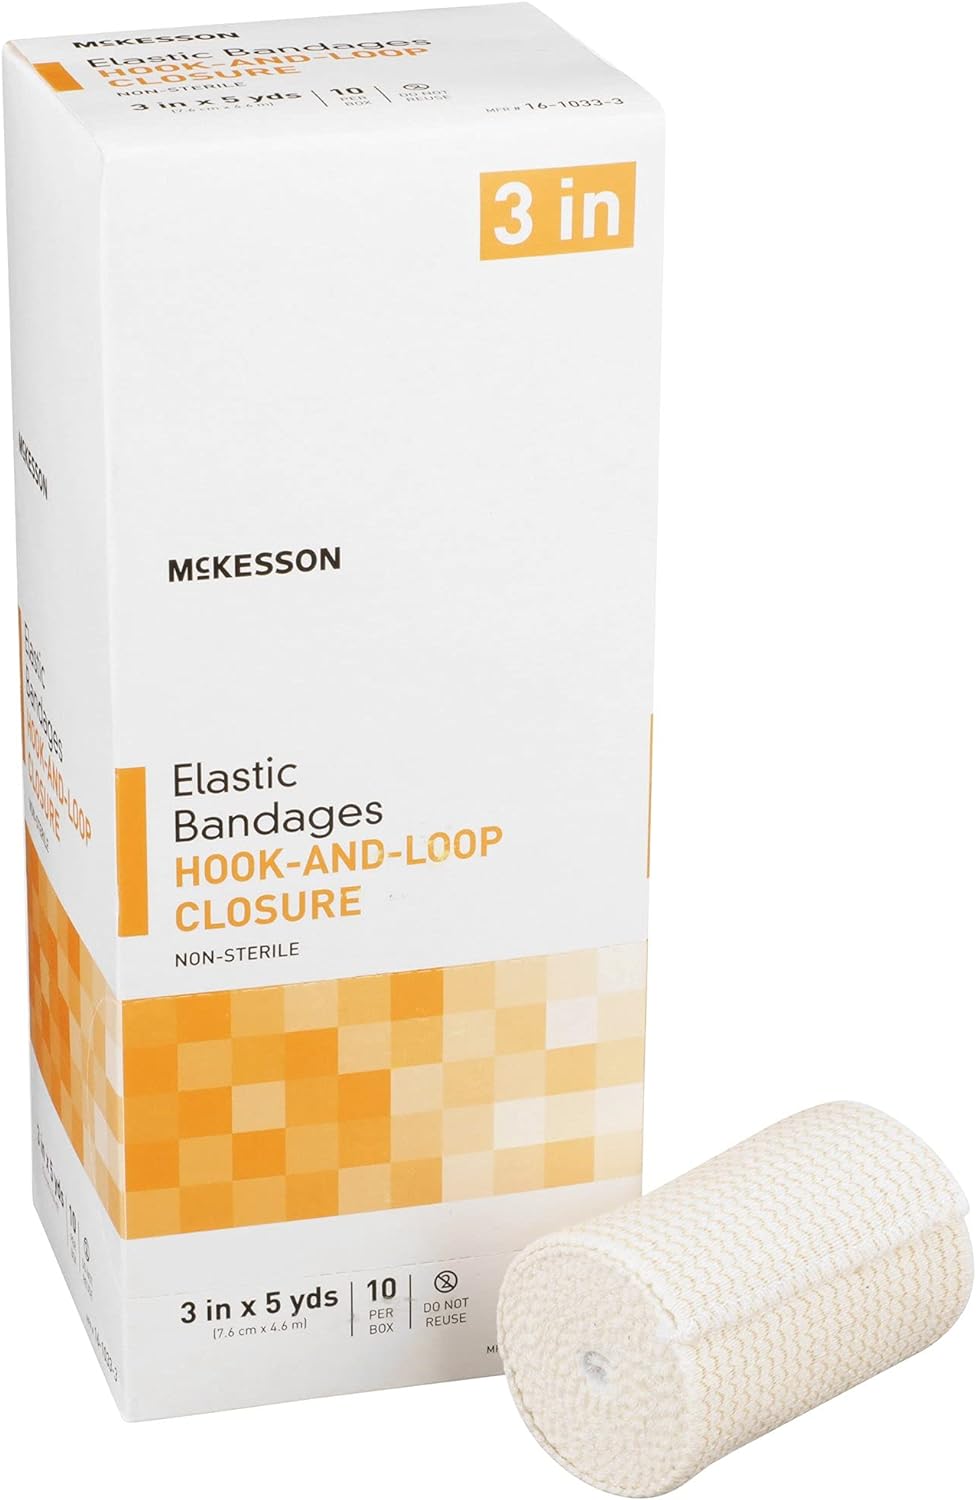 McKesson Elastic Bandages, Non-Sterile, Hook and Loop Closure, 3 in x 5 yd, 10 Count, 1 Pack